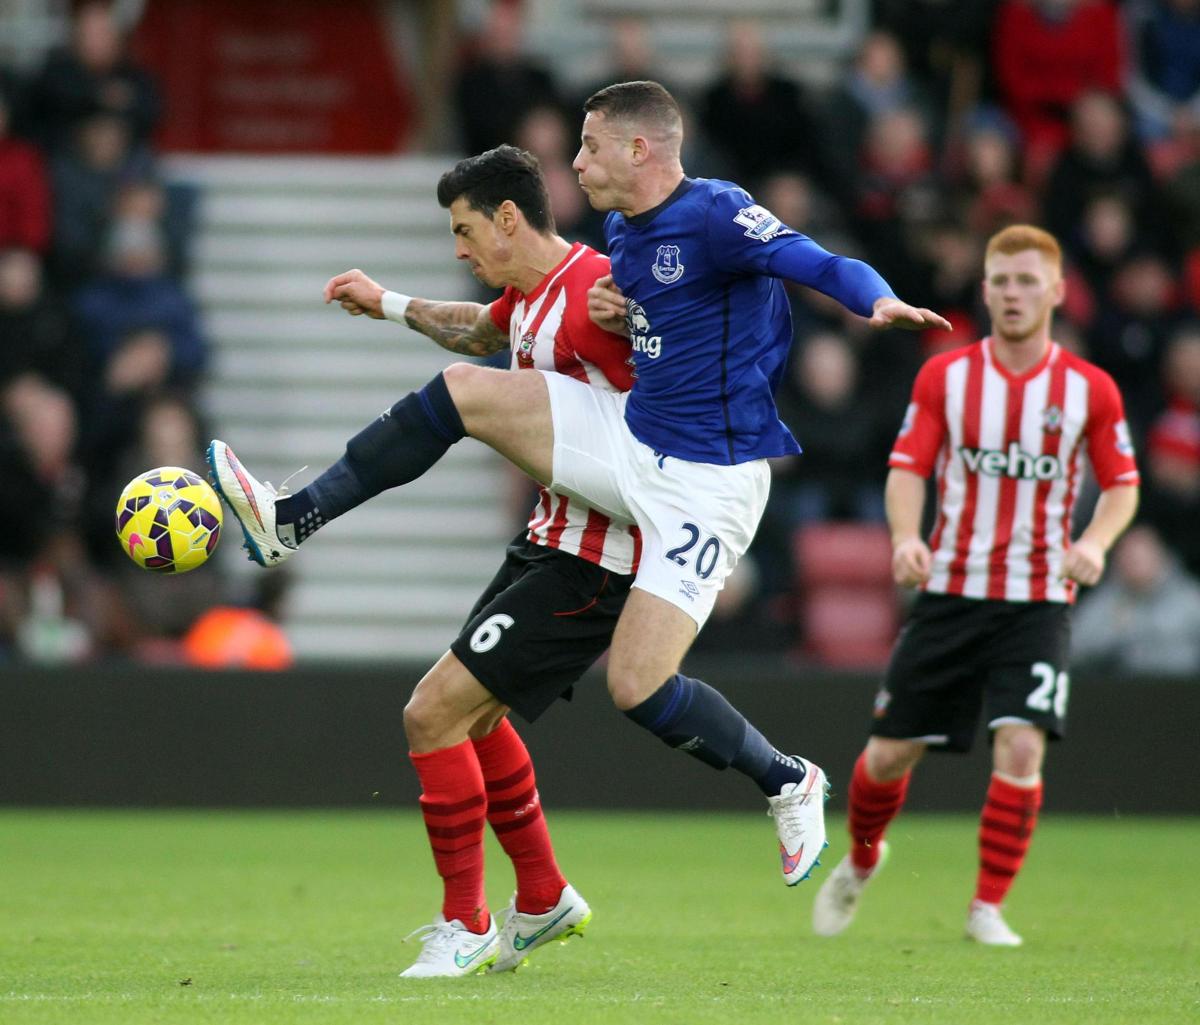 Saints v Everton at St Mary's Stadium. The unauthorised editing, downloading, copying or distribution of this image is strictly prohibited.